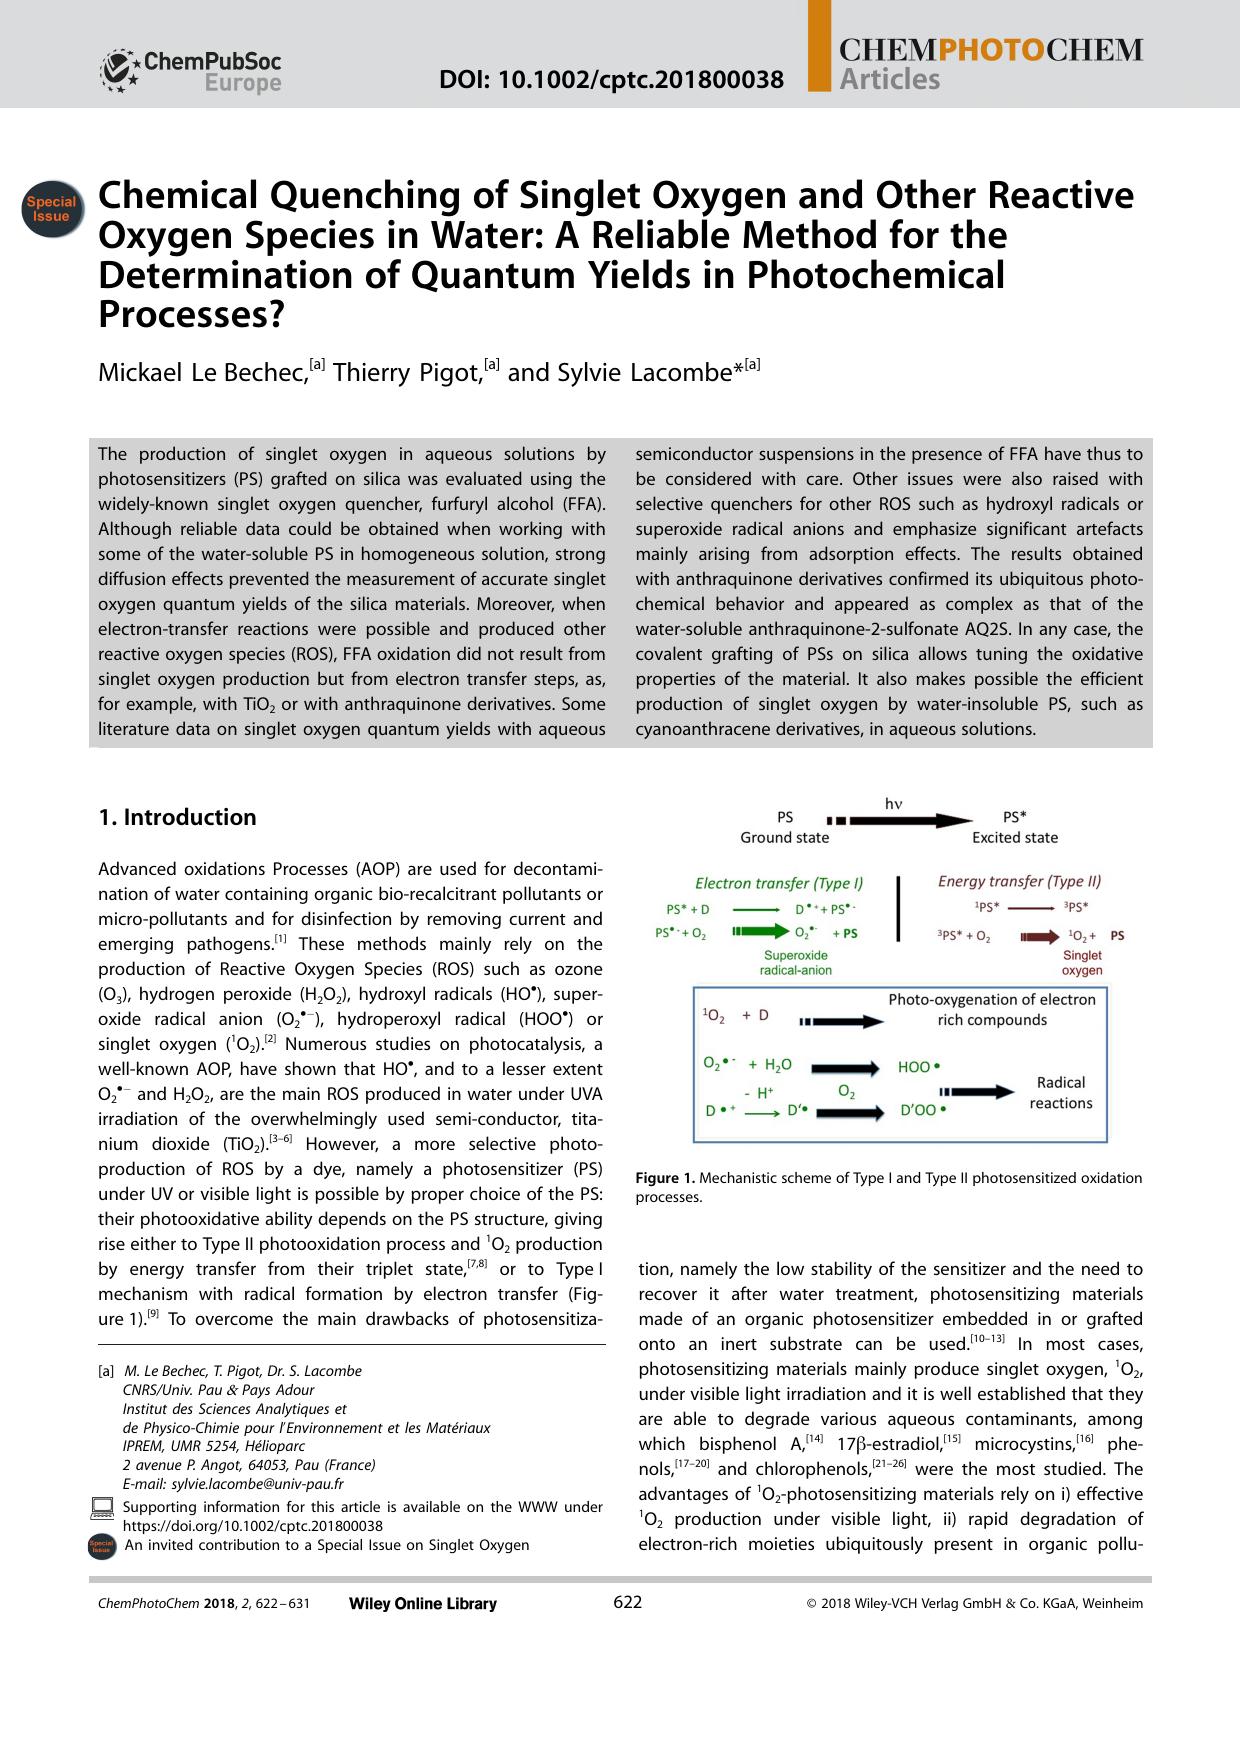 Chemical Quenching of Singlet Oxygen and Other Reactive Oxygen Species in Water: A Reliable Method for the Determination of Quantum Yields in Photochemical Processes? by Unknown